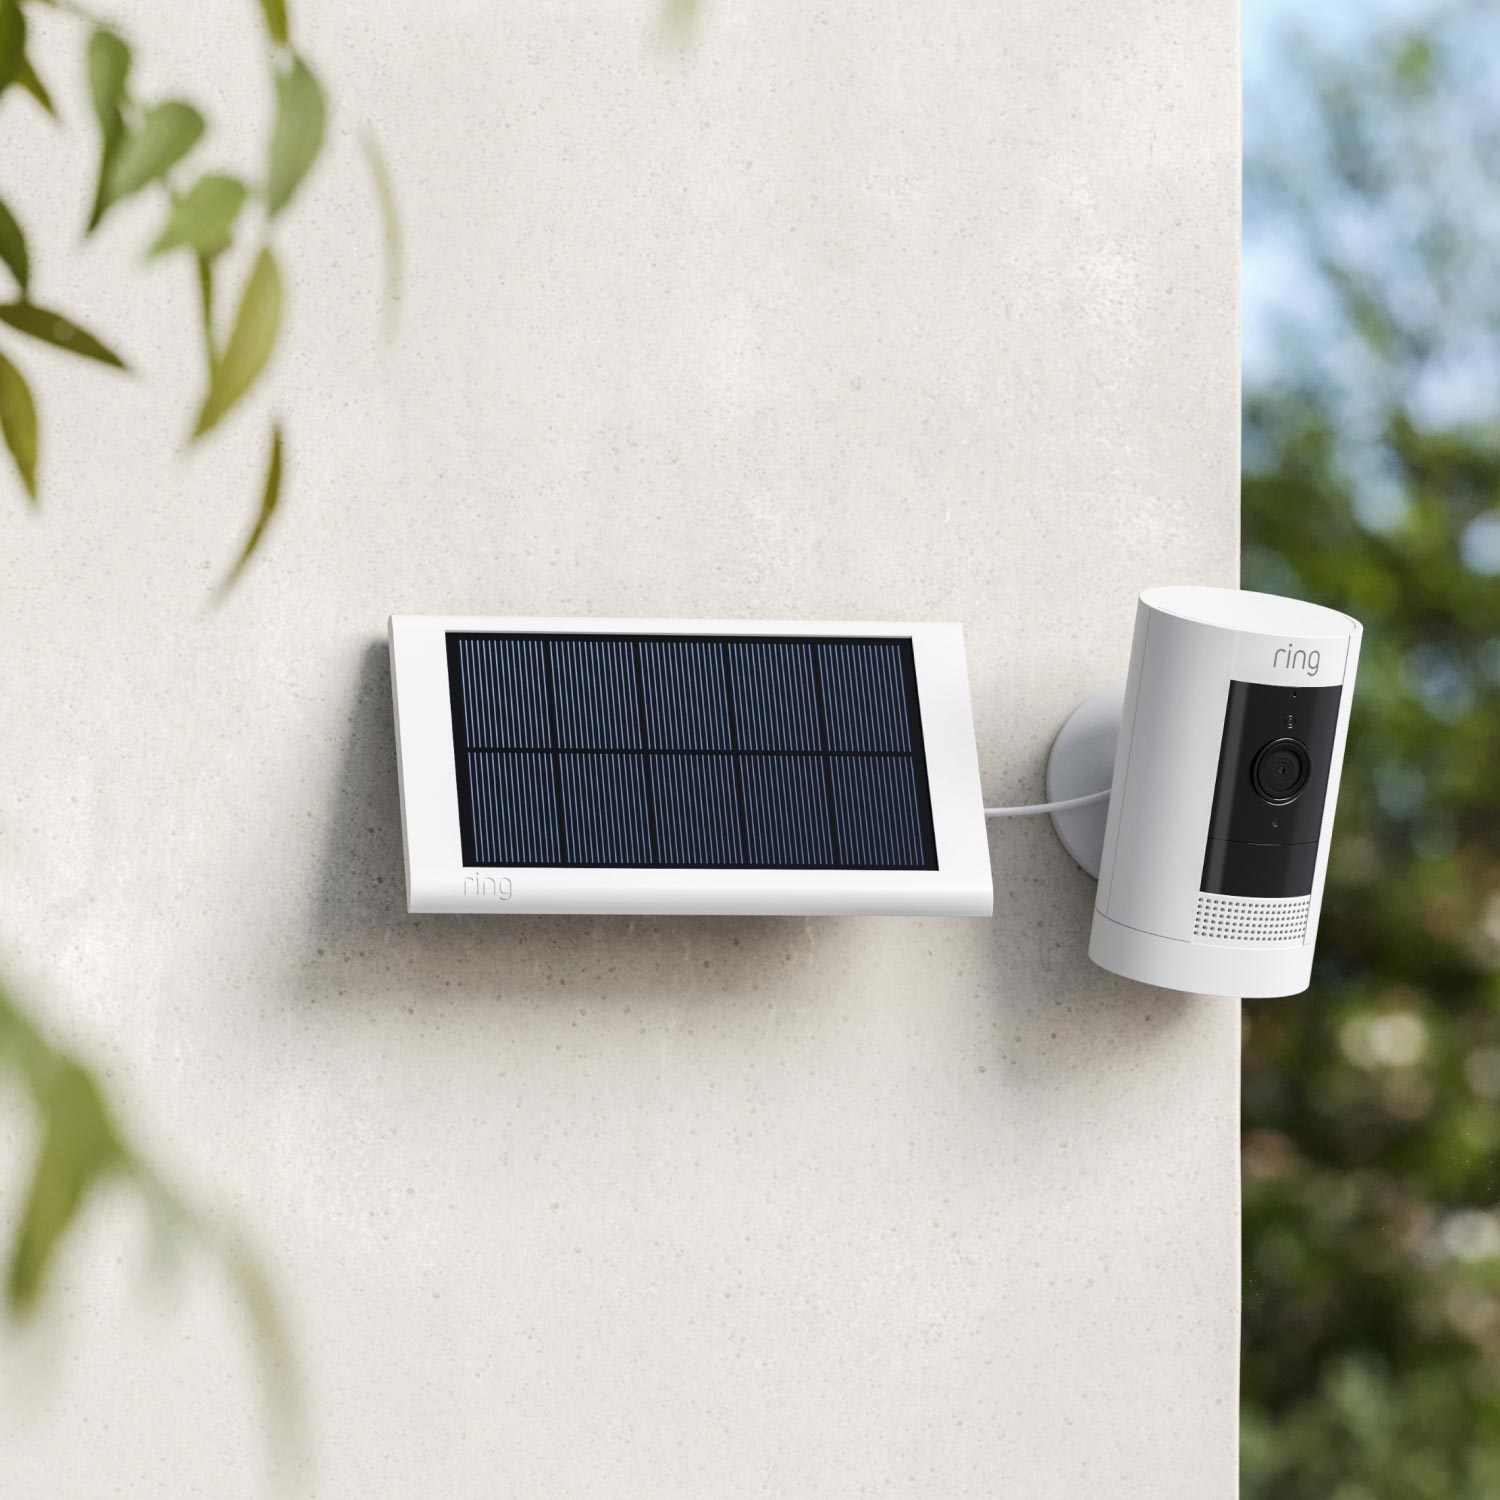 2-Pack Stick Up Cam Solar - Stick Up Cam and small solar panel, both in white, mounted to outside corner of house.